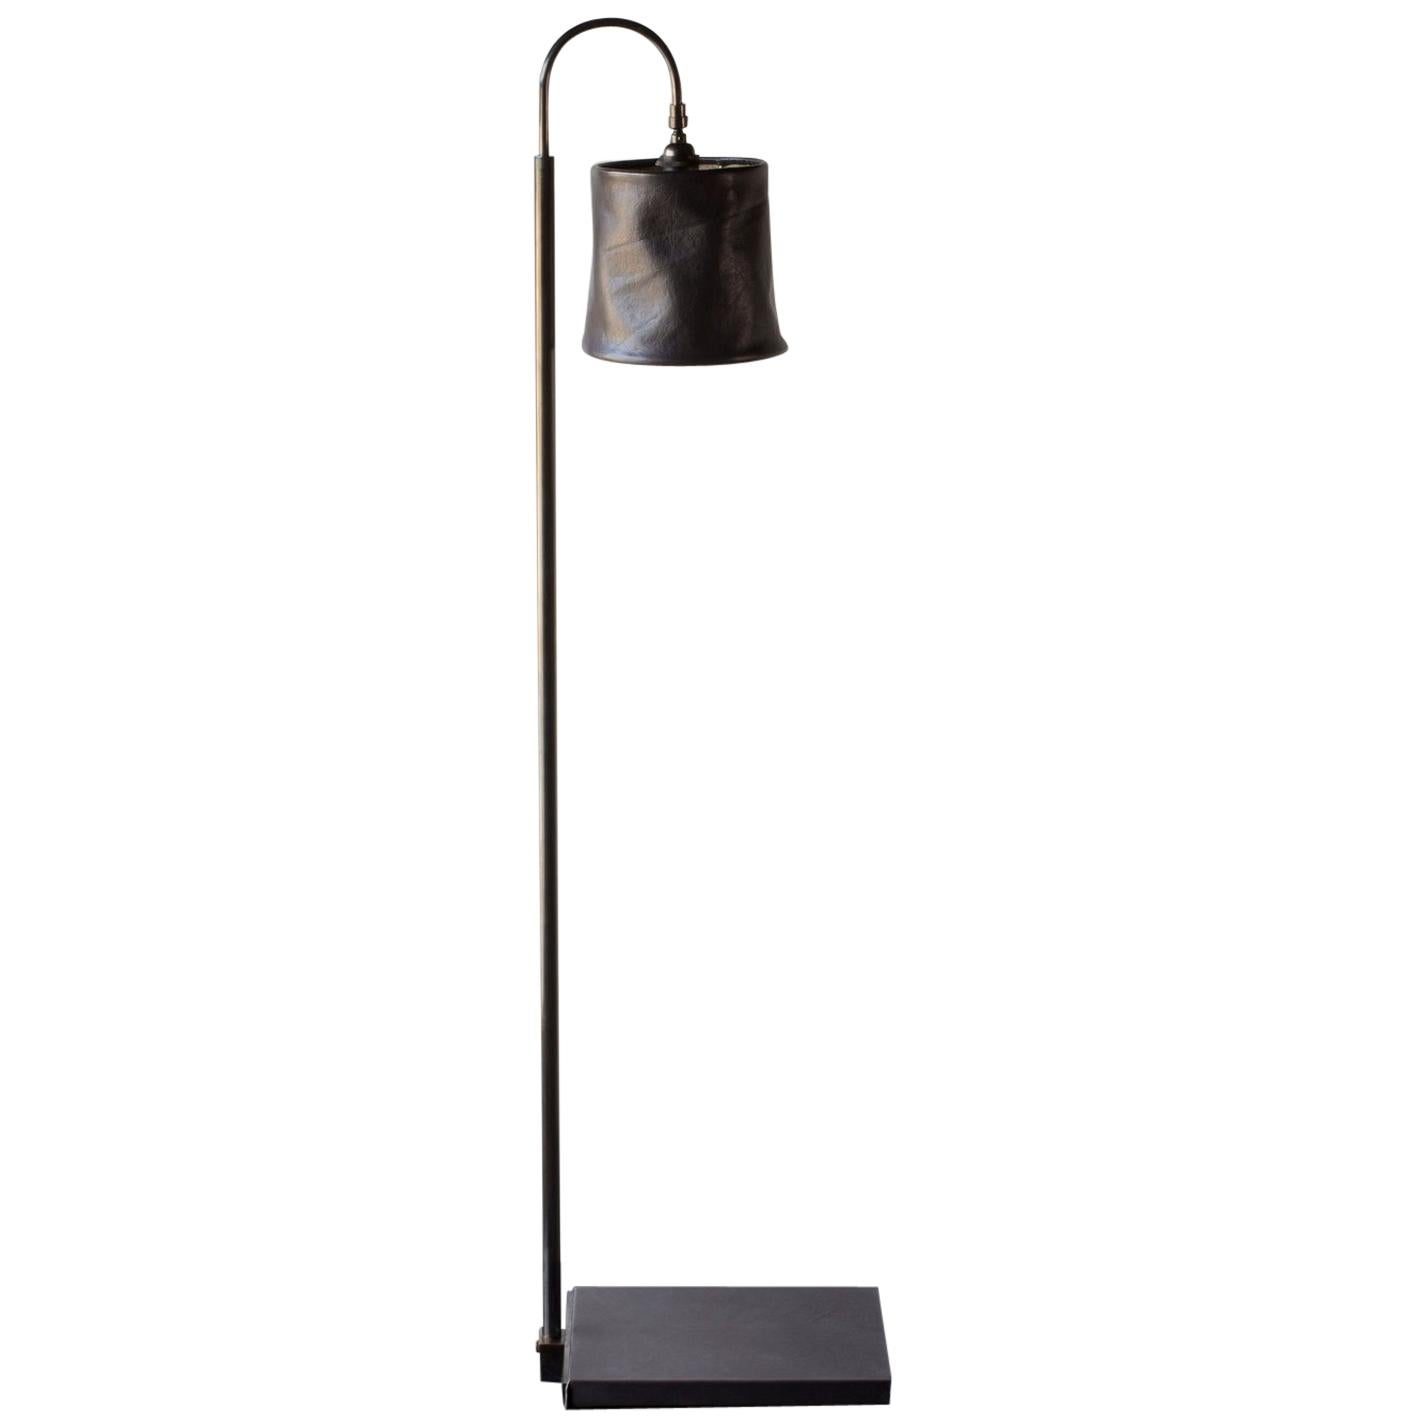 Series01 Floor Lamp, Hand-Dyed Sable, Brown Leather, Dark Patinated Brass